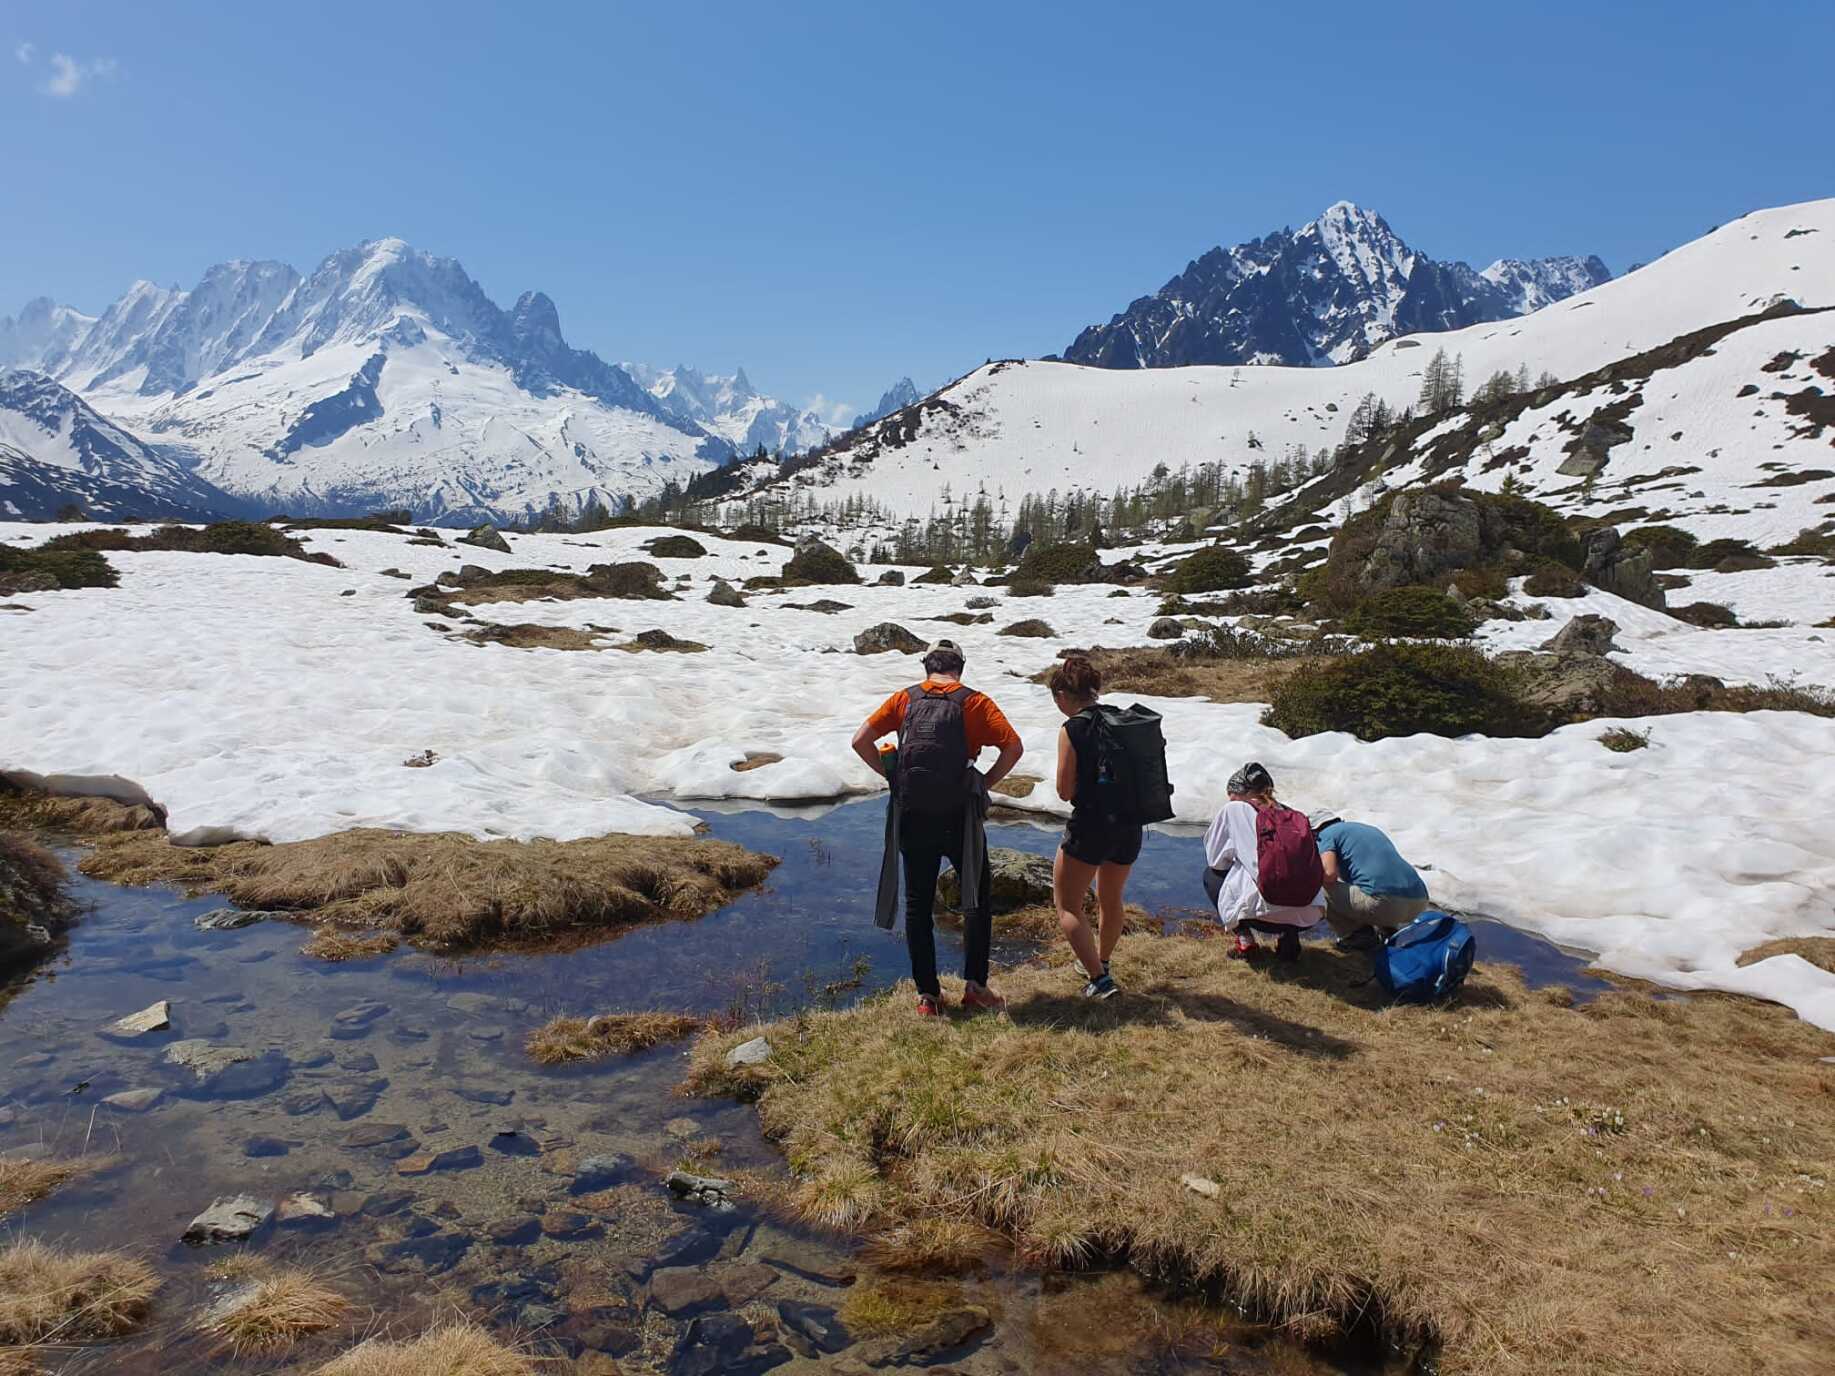 A small organization in the Alps engages citizens in scientific programs